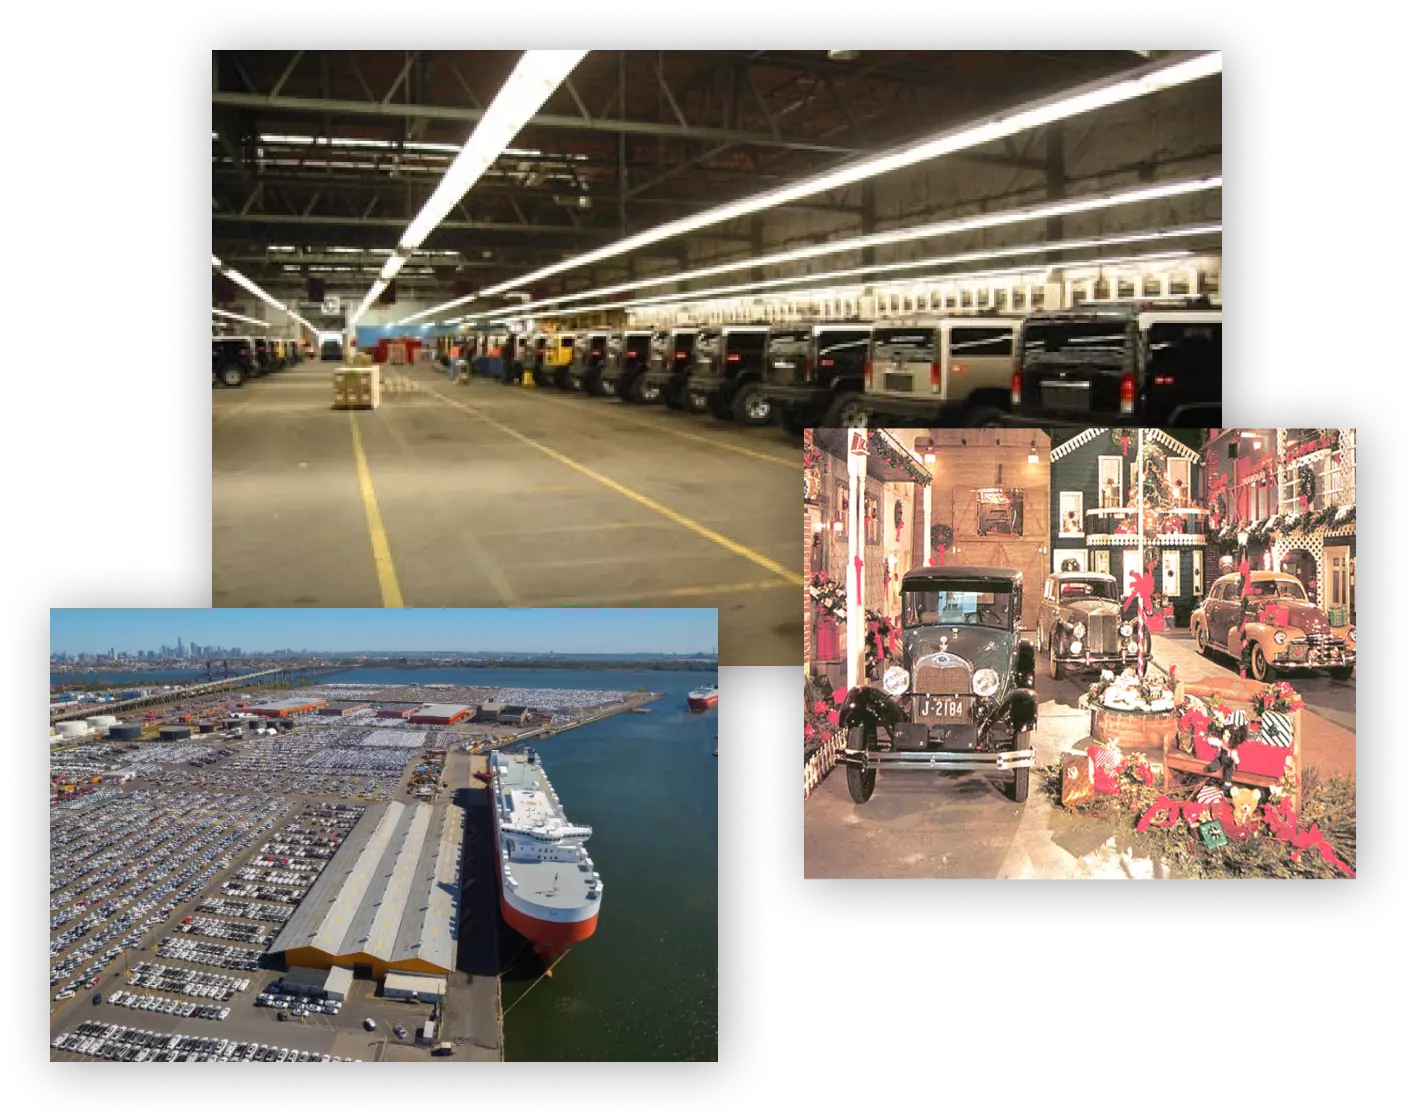 FAPS is the Nation’s Leader in Automotive Import & Export Trade